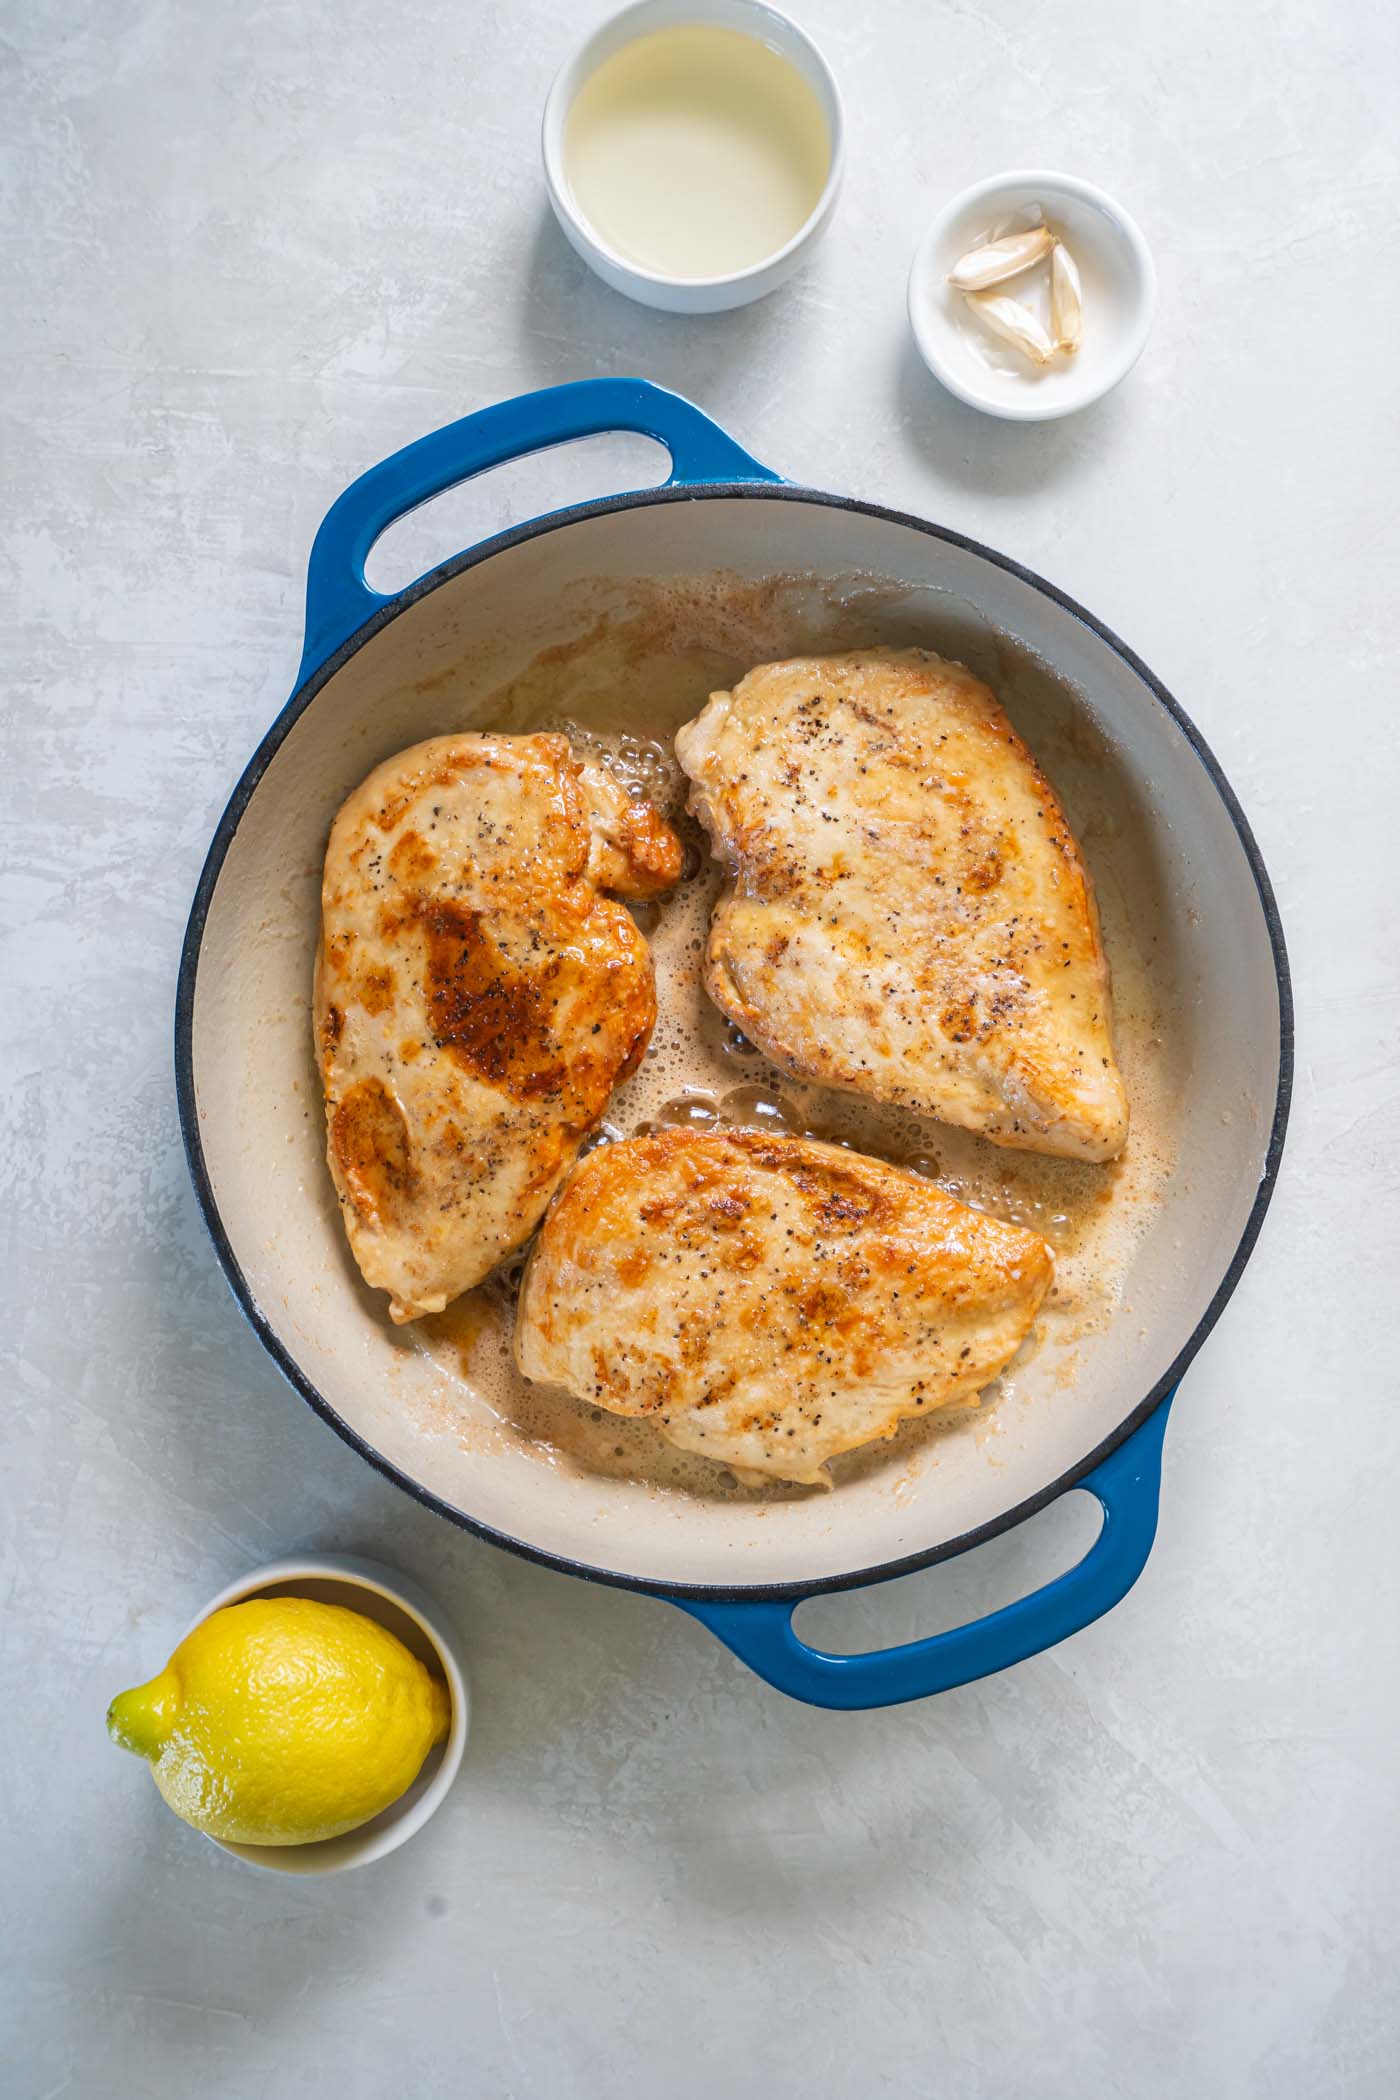 Browning chicken breasts in pan.